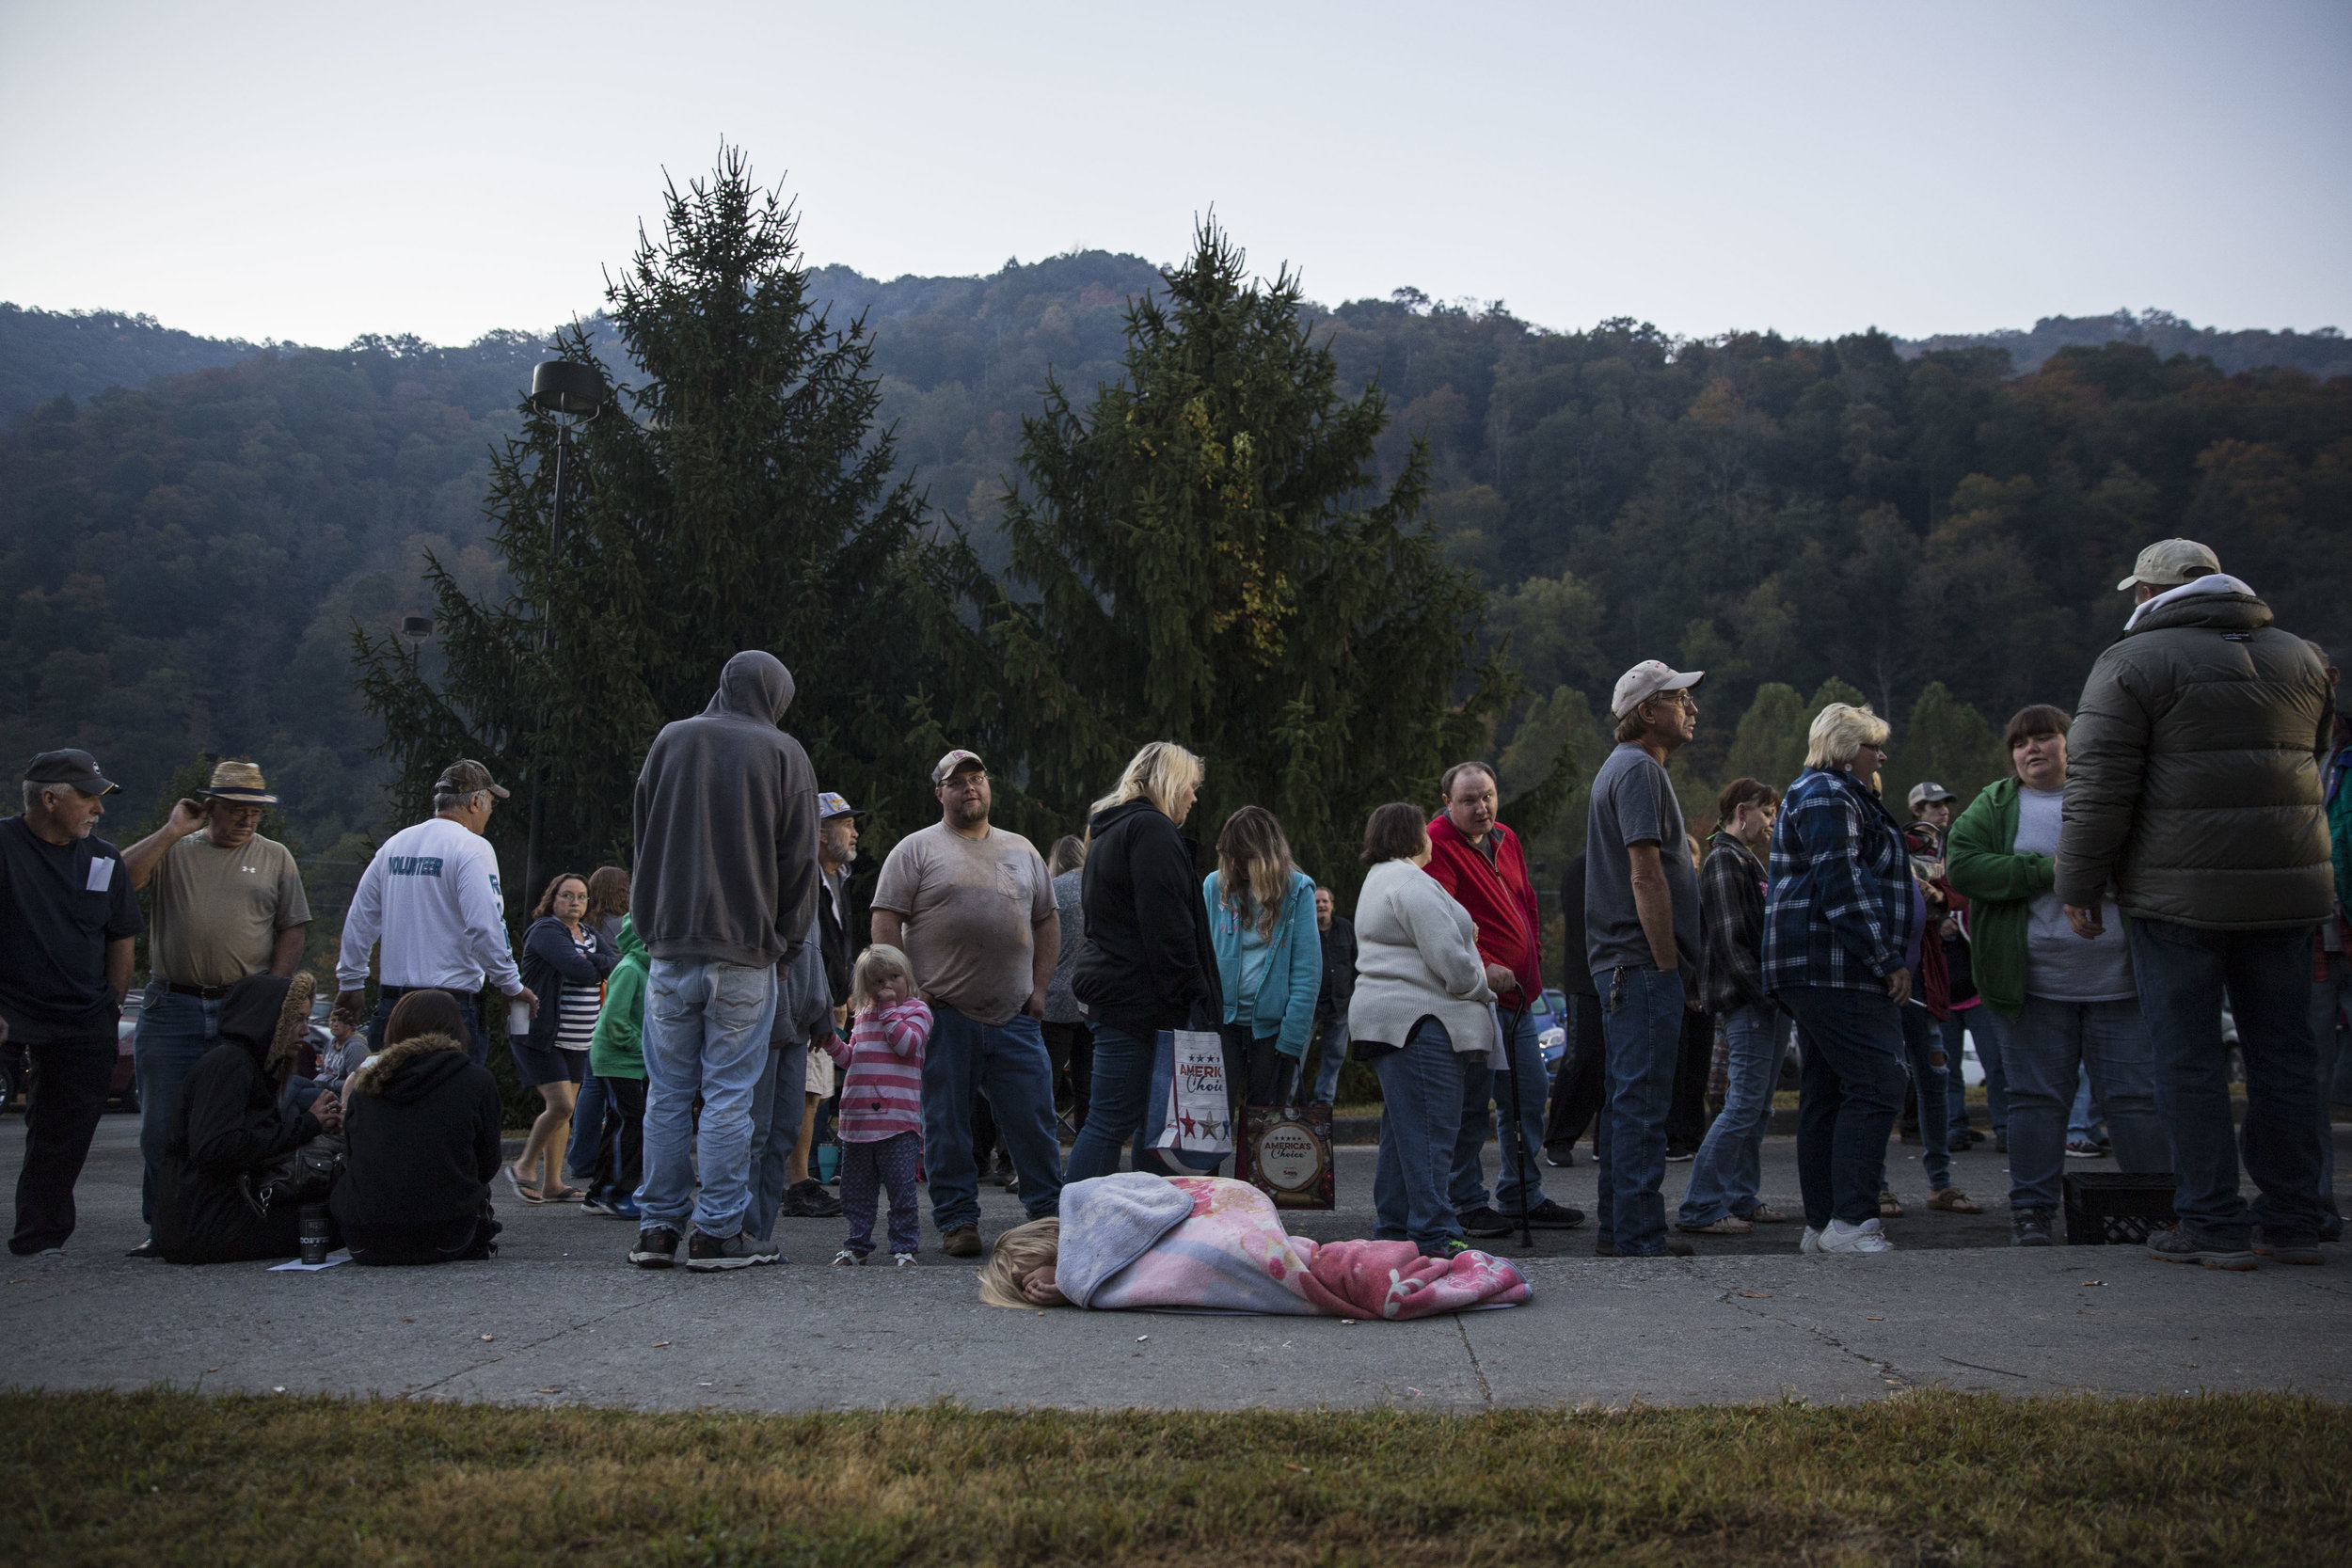   People wait to enter the Remote Area Medical (RAM) mobile clinic in Grundy, Virginia, which provided free general health services to uninsured and underinsured people in remote areas of the US.  